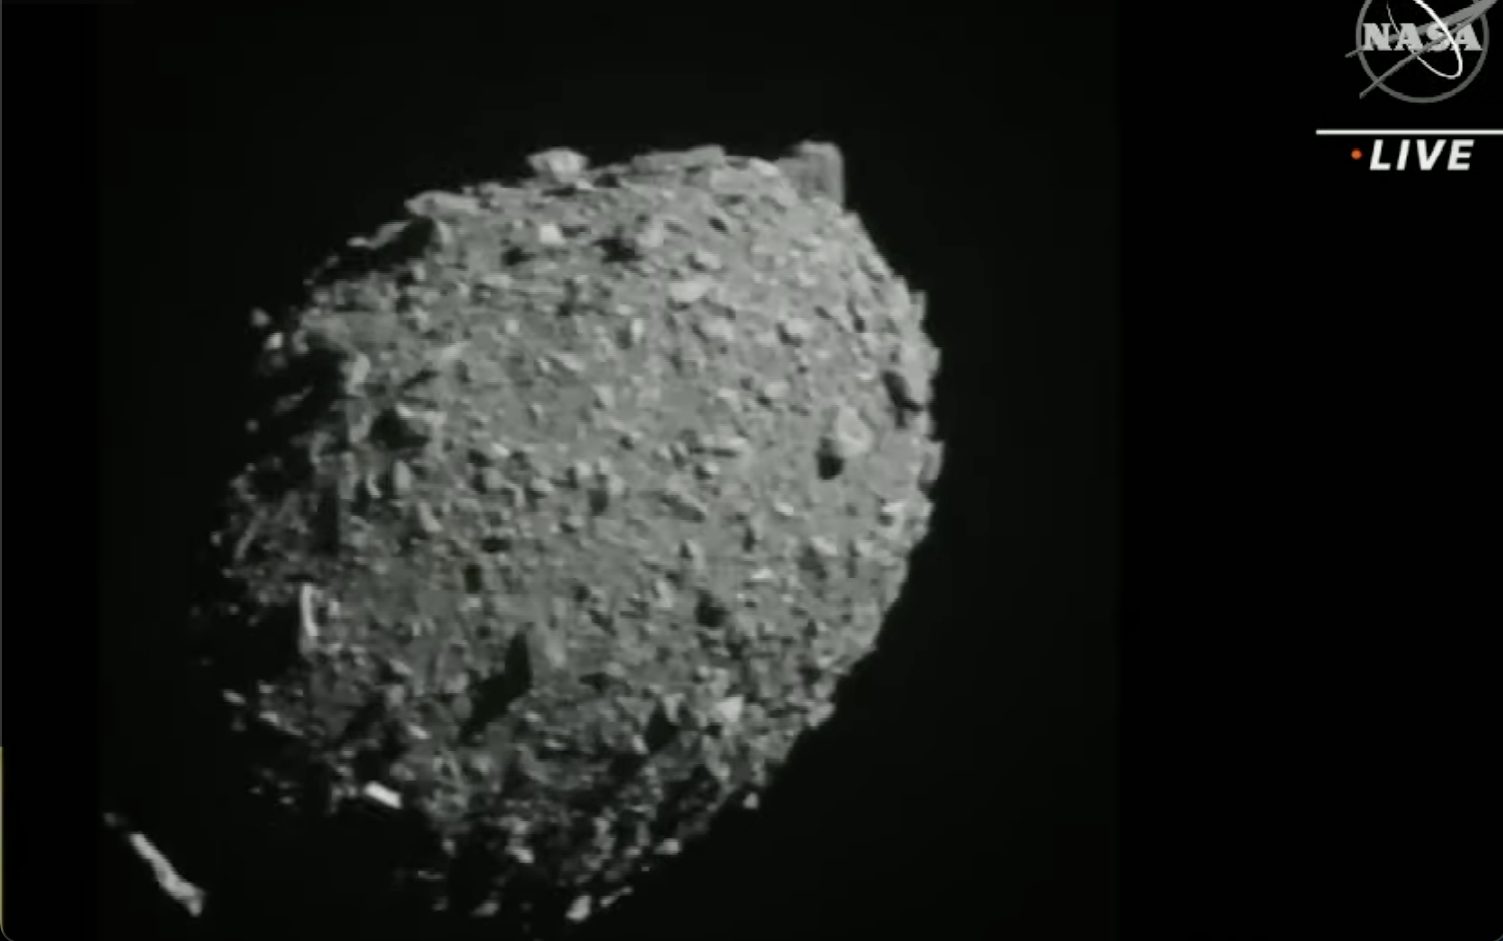 Boom! NASA just slammed into an asteroid and filmed the crash